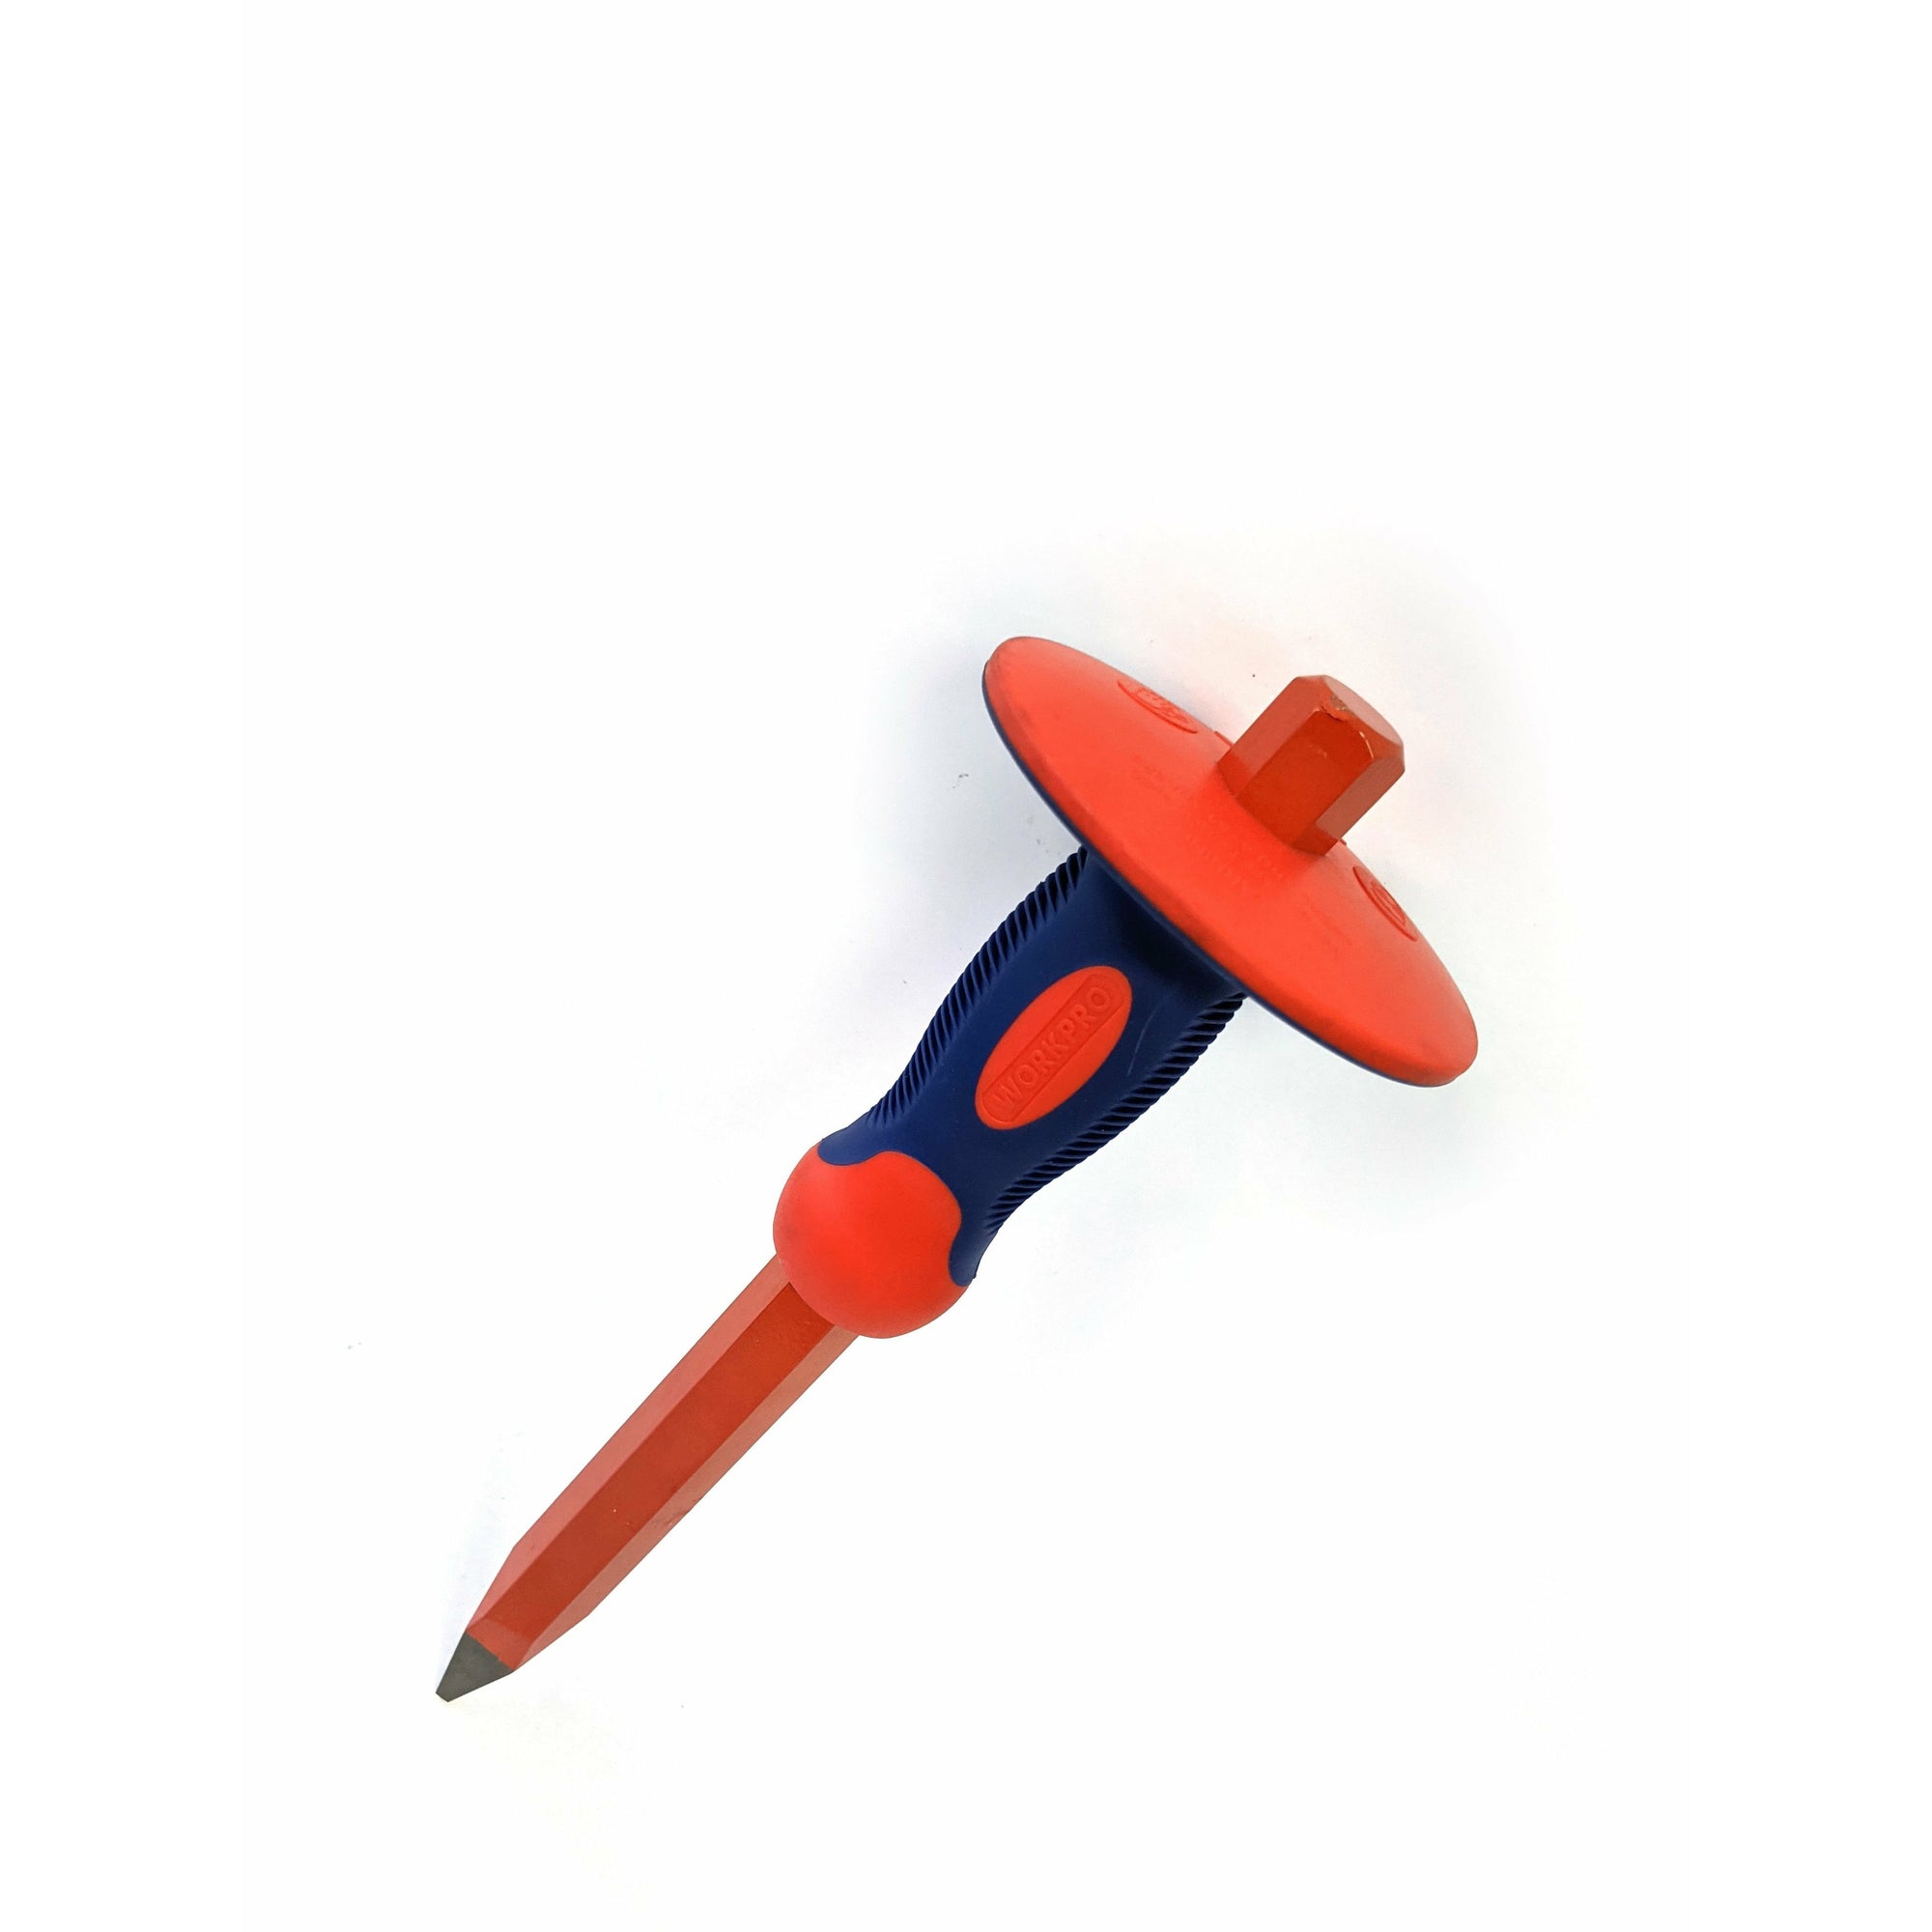 Workpro Concrete Chisel 12Inch